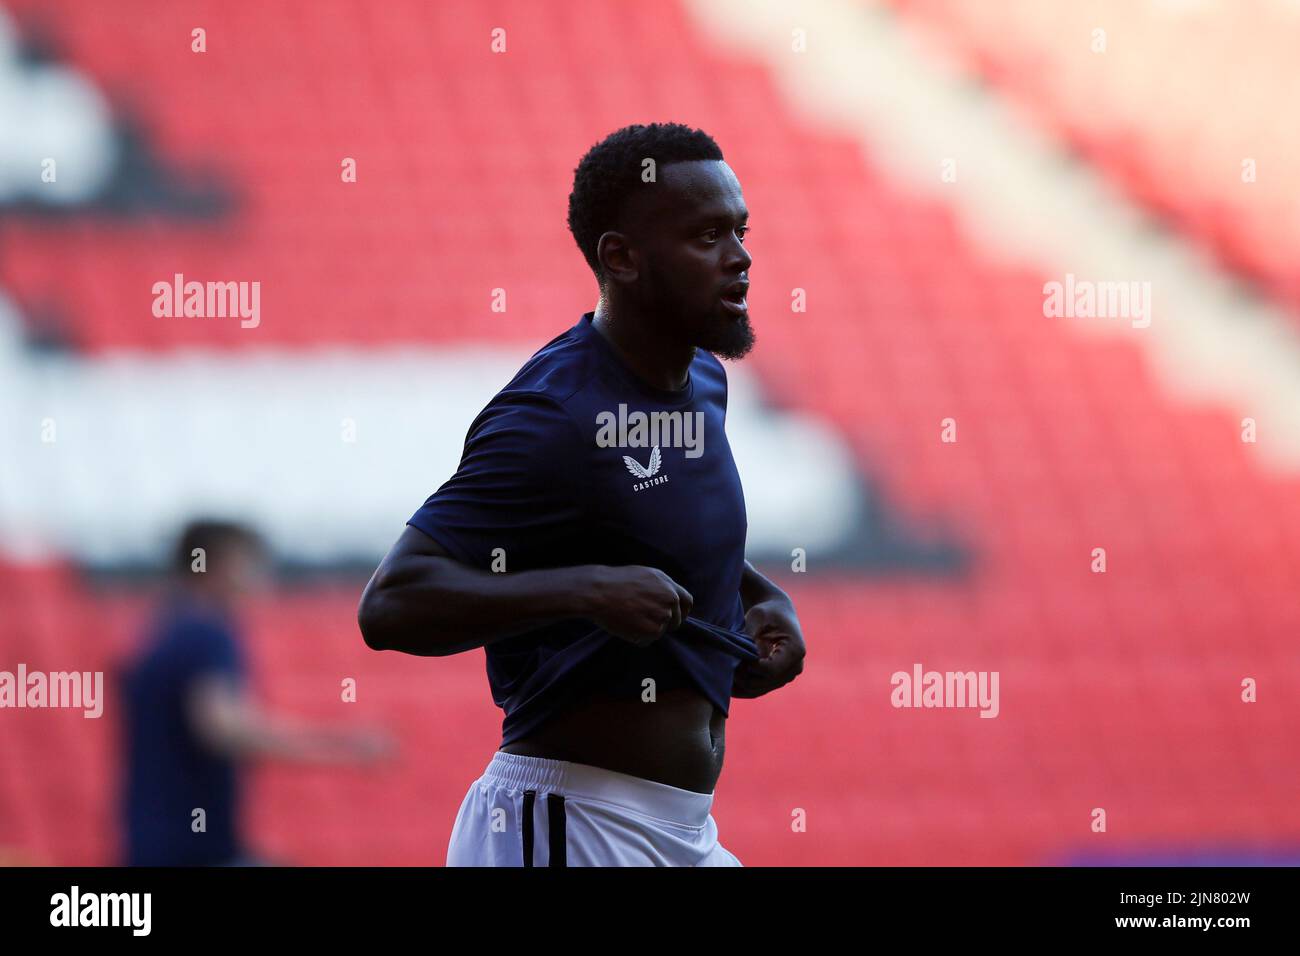 The Valley, London on Tuesday 9th August 2022. Diallang Jaiyesimi of Charlton Athletic warms up during the Carabao Cup match between Charlton Athletic and Queens Park Rangers at The Valley, London on Tuesday 9th August 2022. (Credit: Tom West | MI News) Credit: MI News & Sport /Alamy Live News Stock Photo